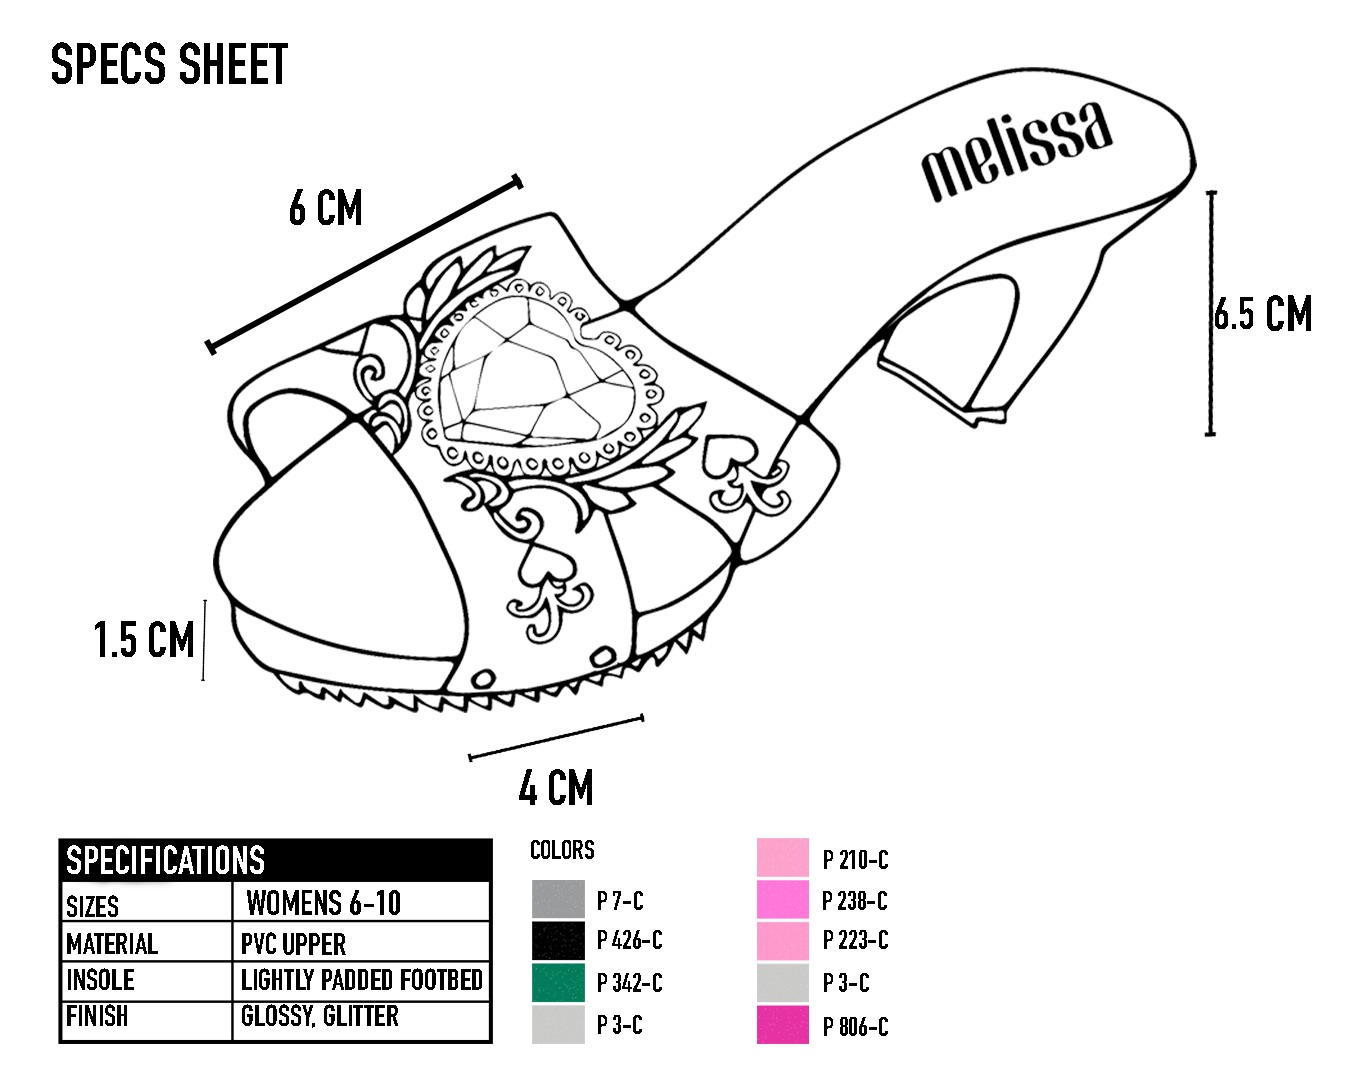 SPECS SHEET

  

6.5CM

SPECIFICATIONS

MATERIAL PVC UPPER
INSOLE LIGHTLY PADDED FOOTBED
[FSH LOSSY GUTTER